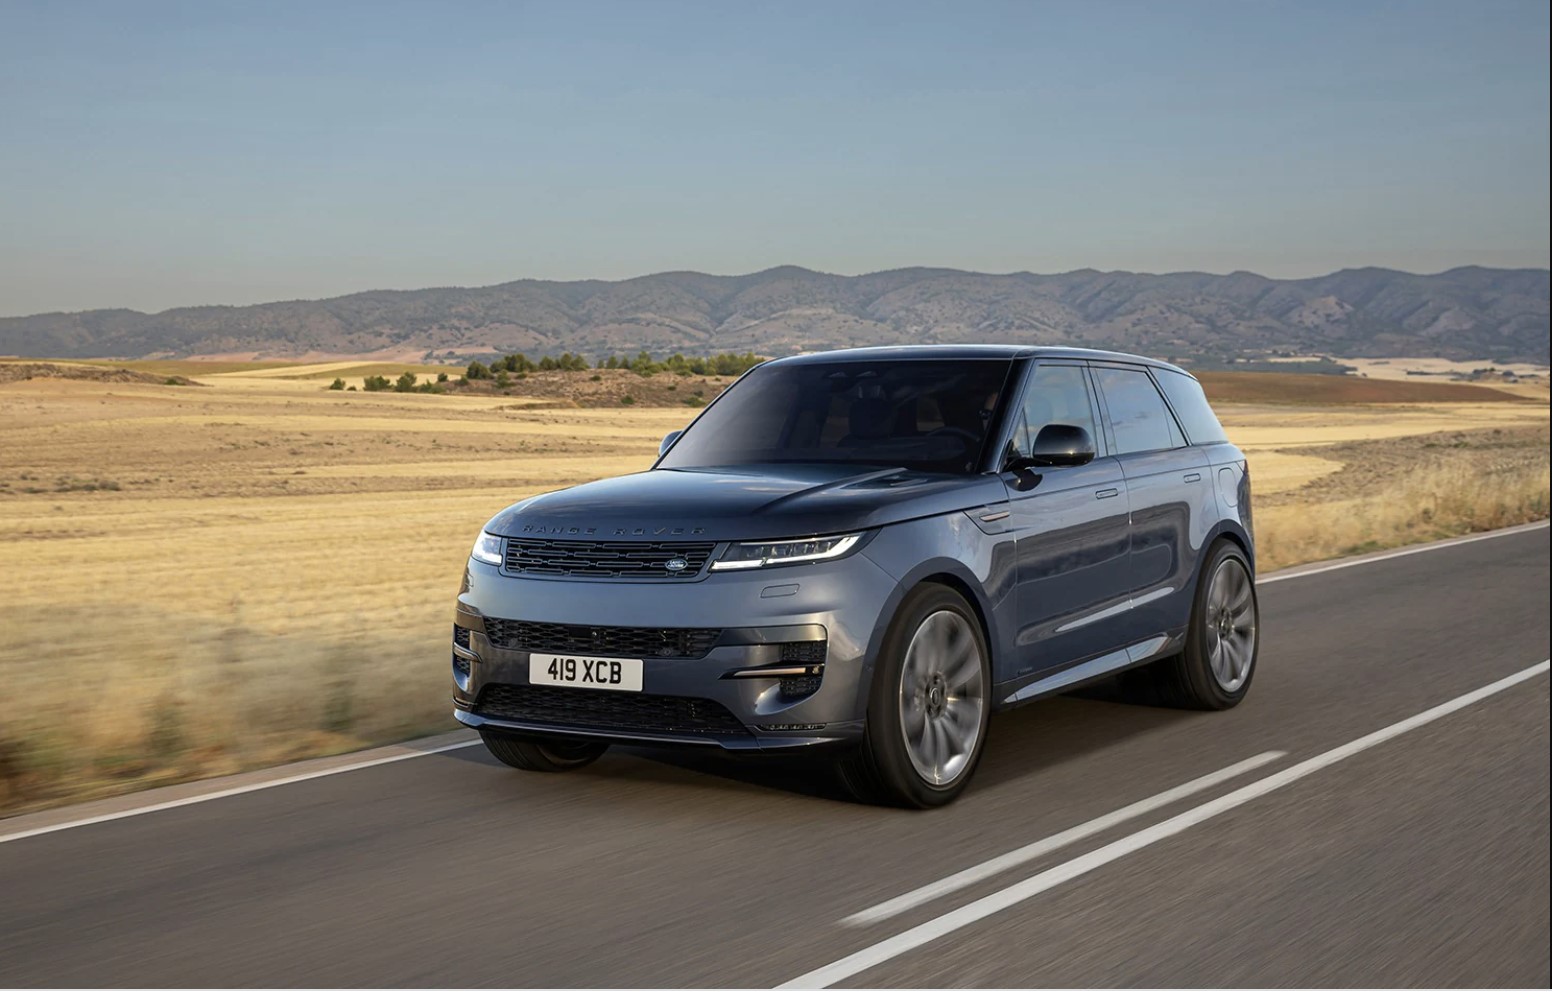 How much does the 2023 Range Rover Sport cost?